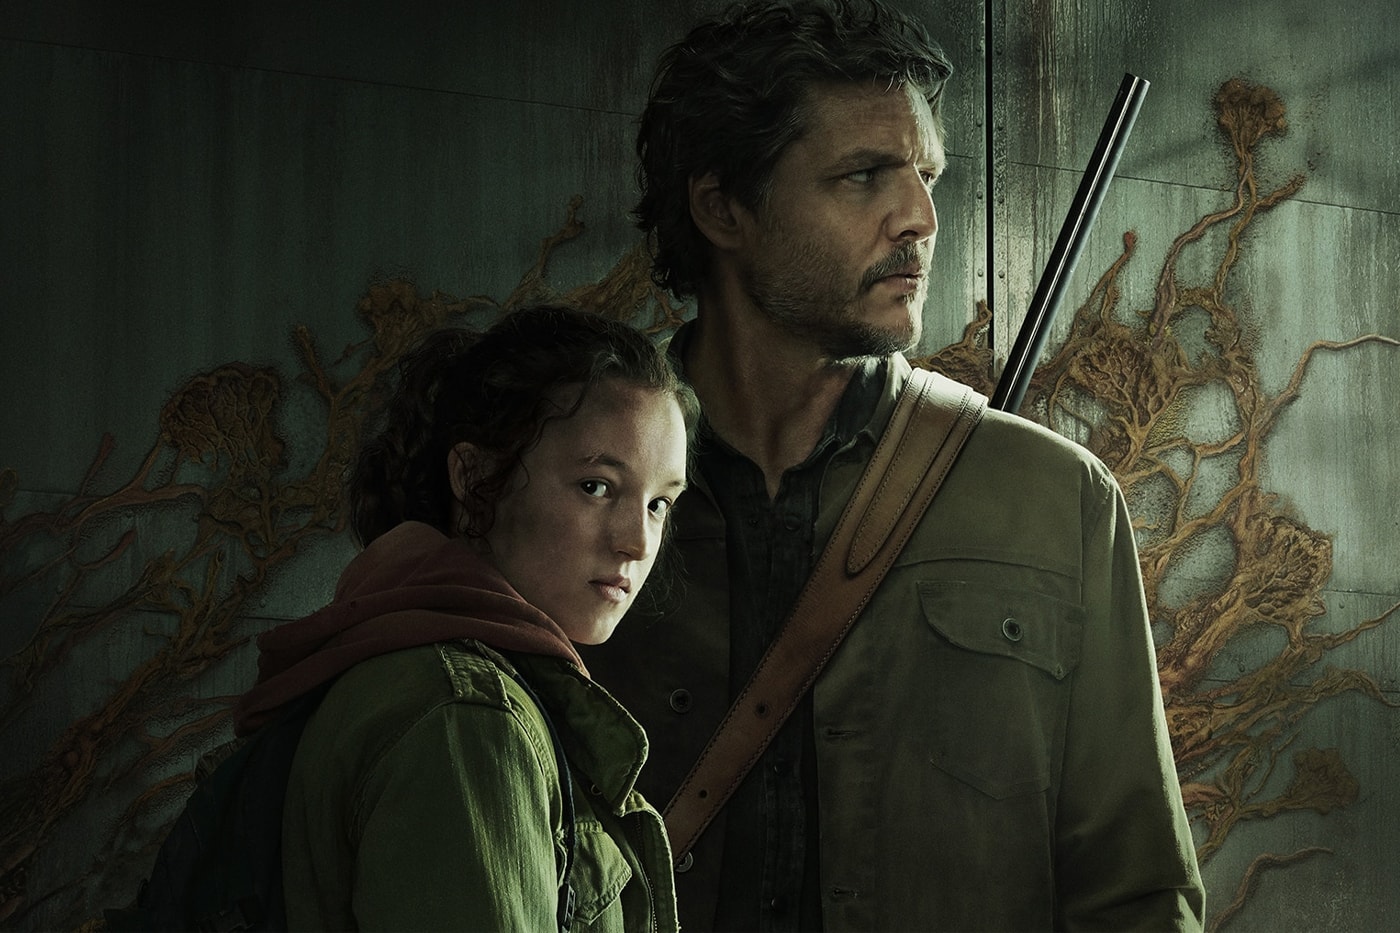 'The Last of Us' Surpasses 'House of the Dragon' as HBO's Top Series game of thrones pedro pascal Neil Druckmann video game Bella ramsey